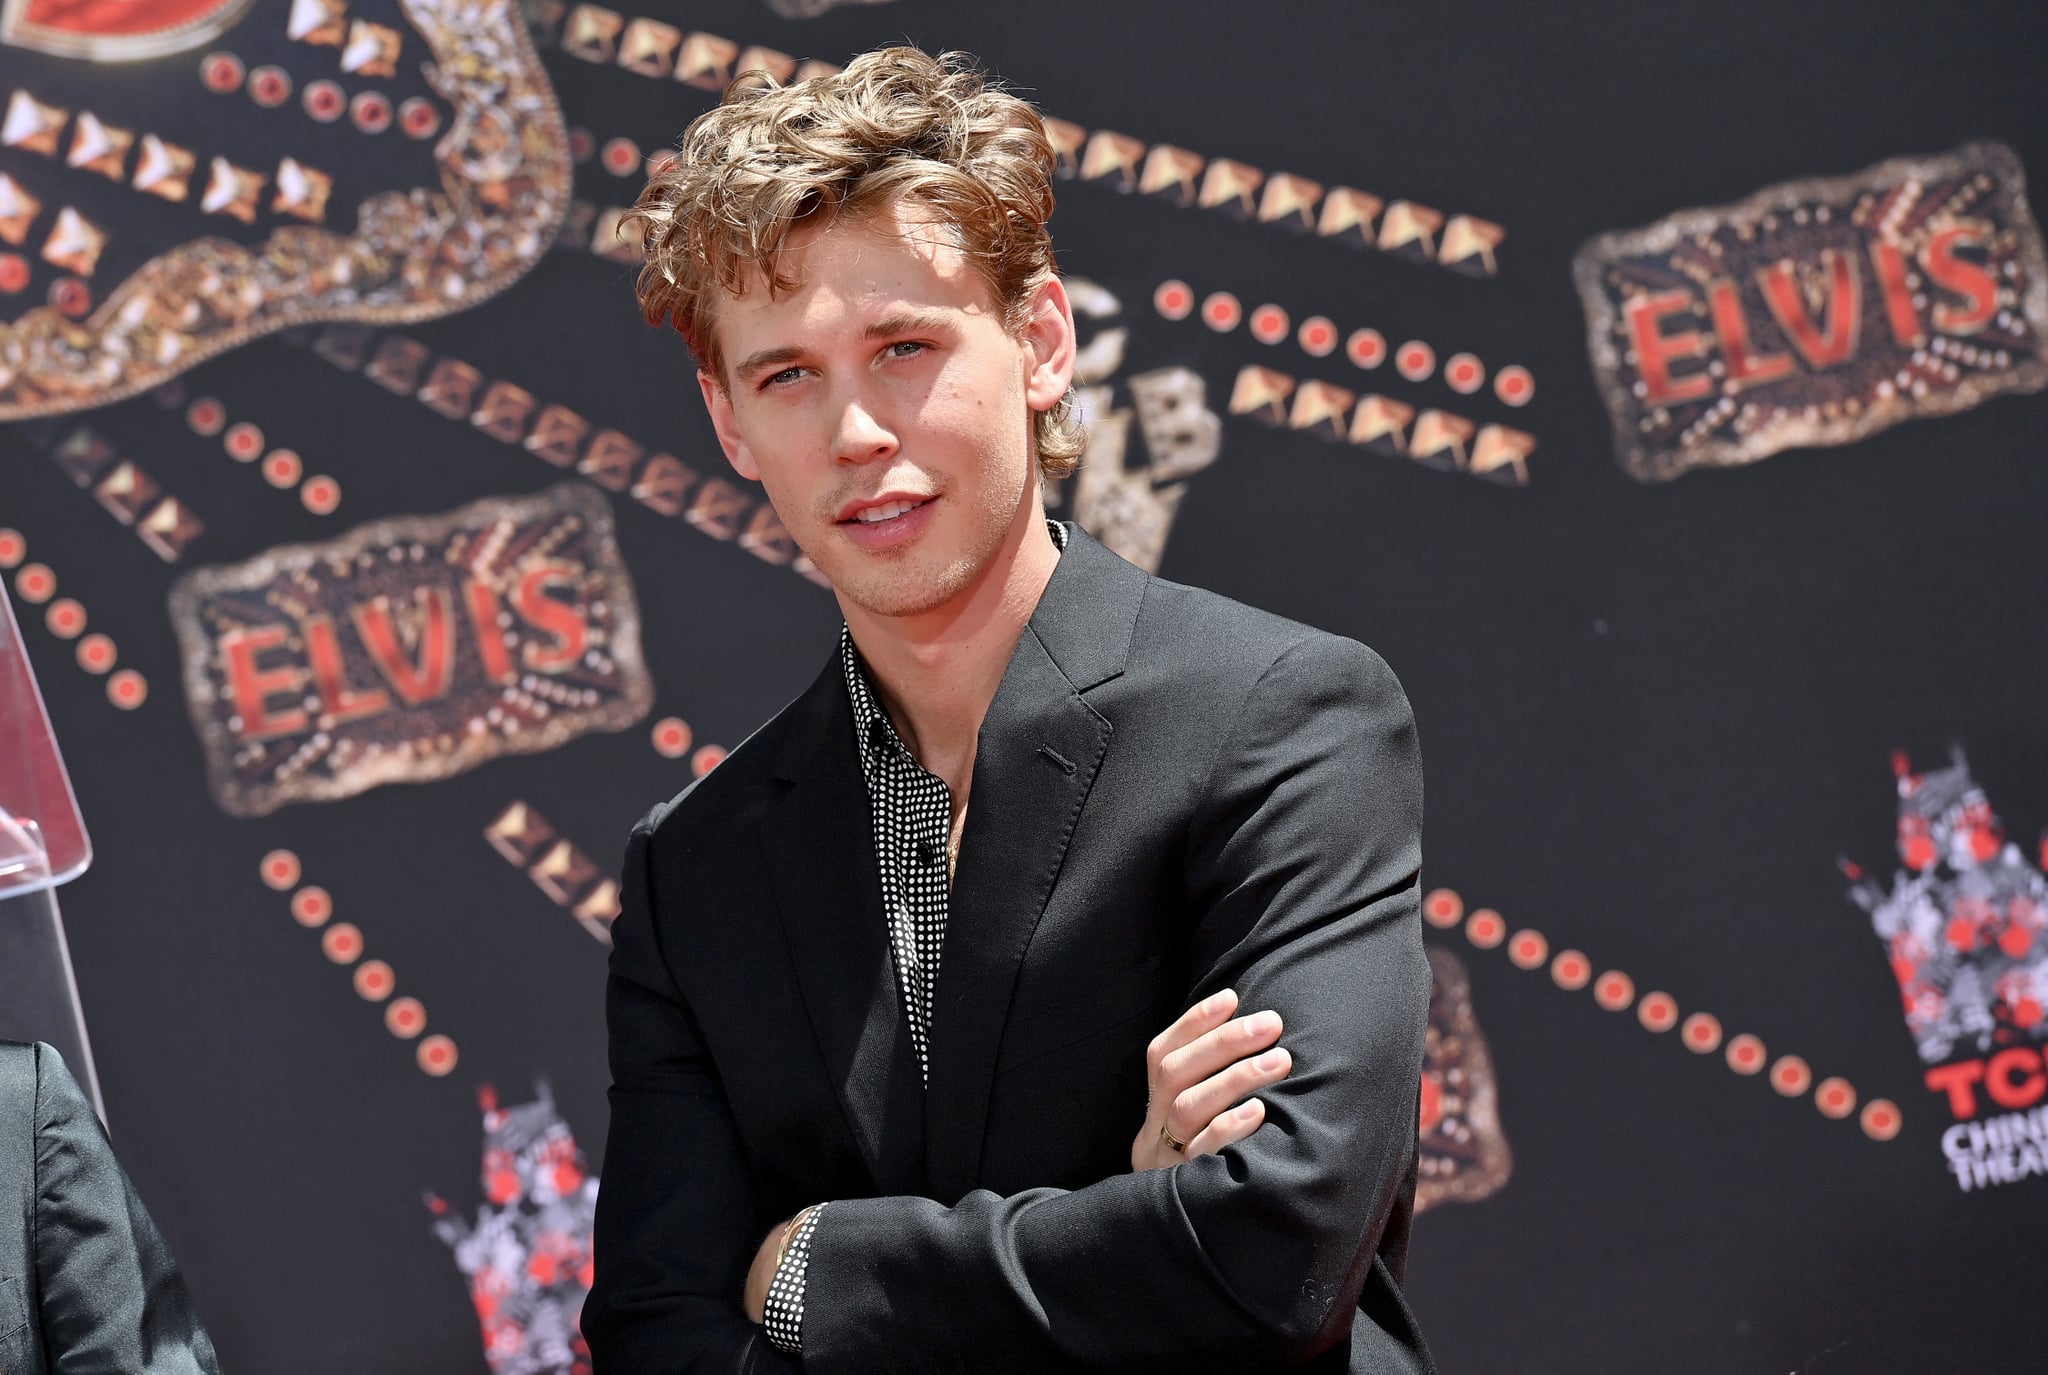 HOLLYWOOD, CALIFORNIA - JUNE 21: Austin Butler attends the Handprint Ceremony honouring Three Generations of Presley's at TCL Chinese Theatre on June 21, 2022 in Hollywood, California. (Photo by Axelle/Bauer-Griffin/FilmMagic)